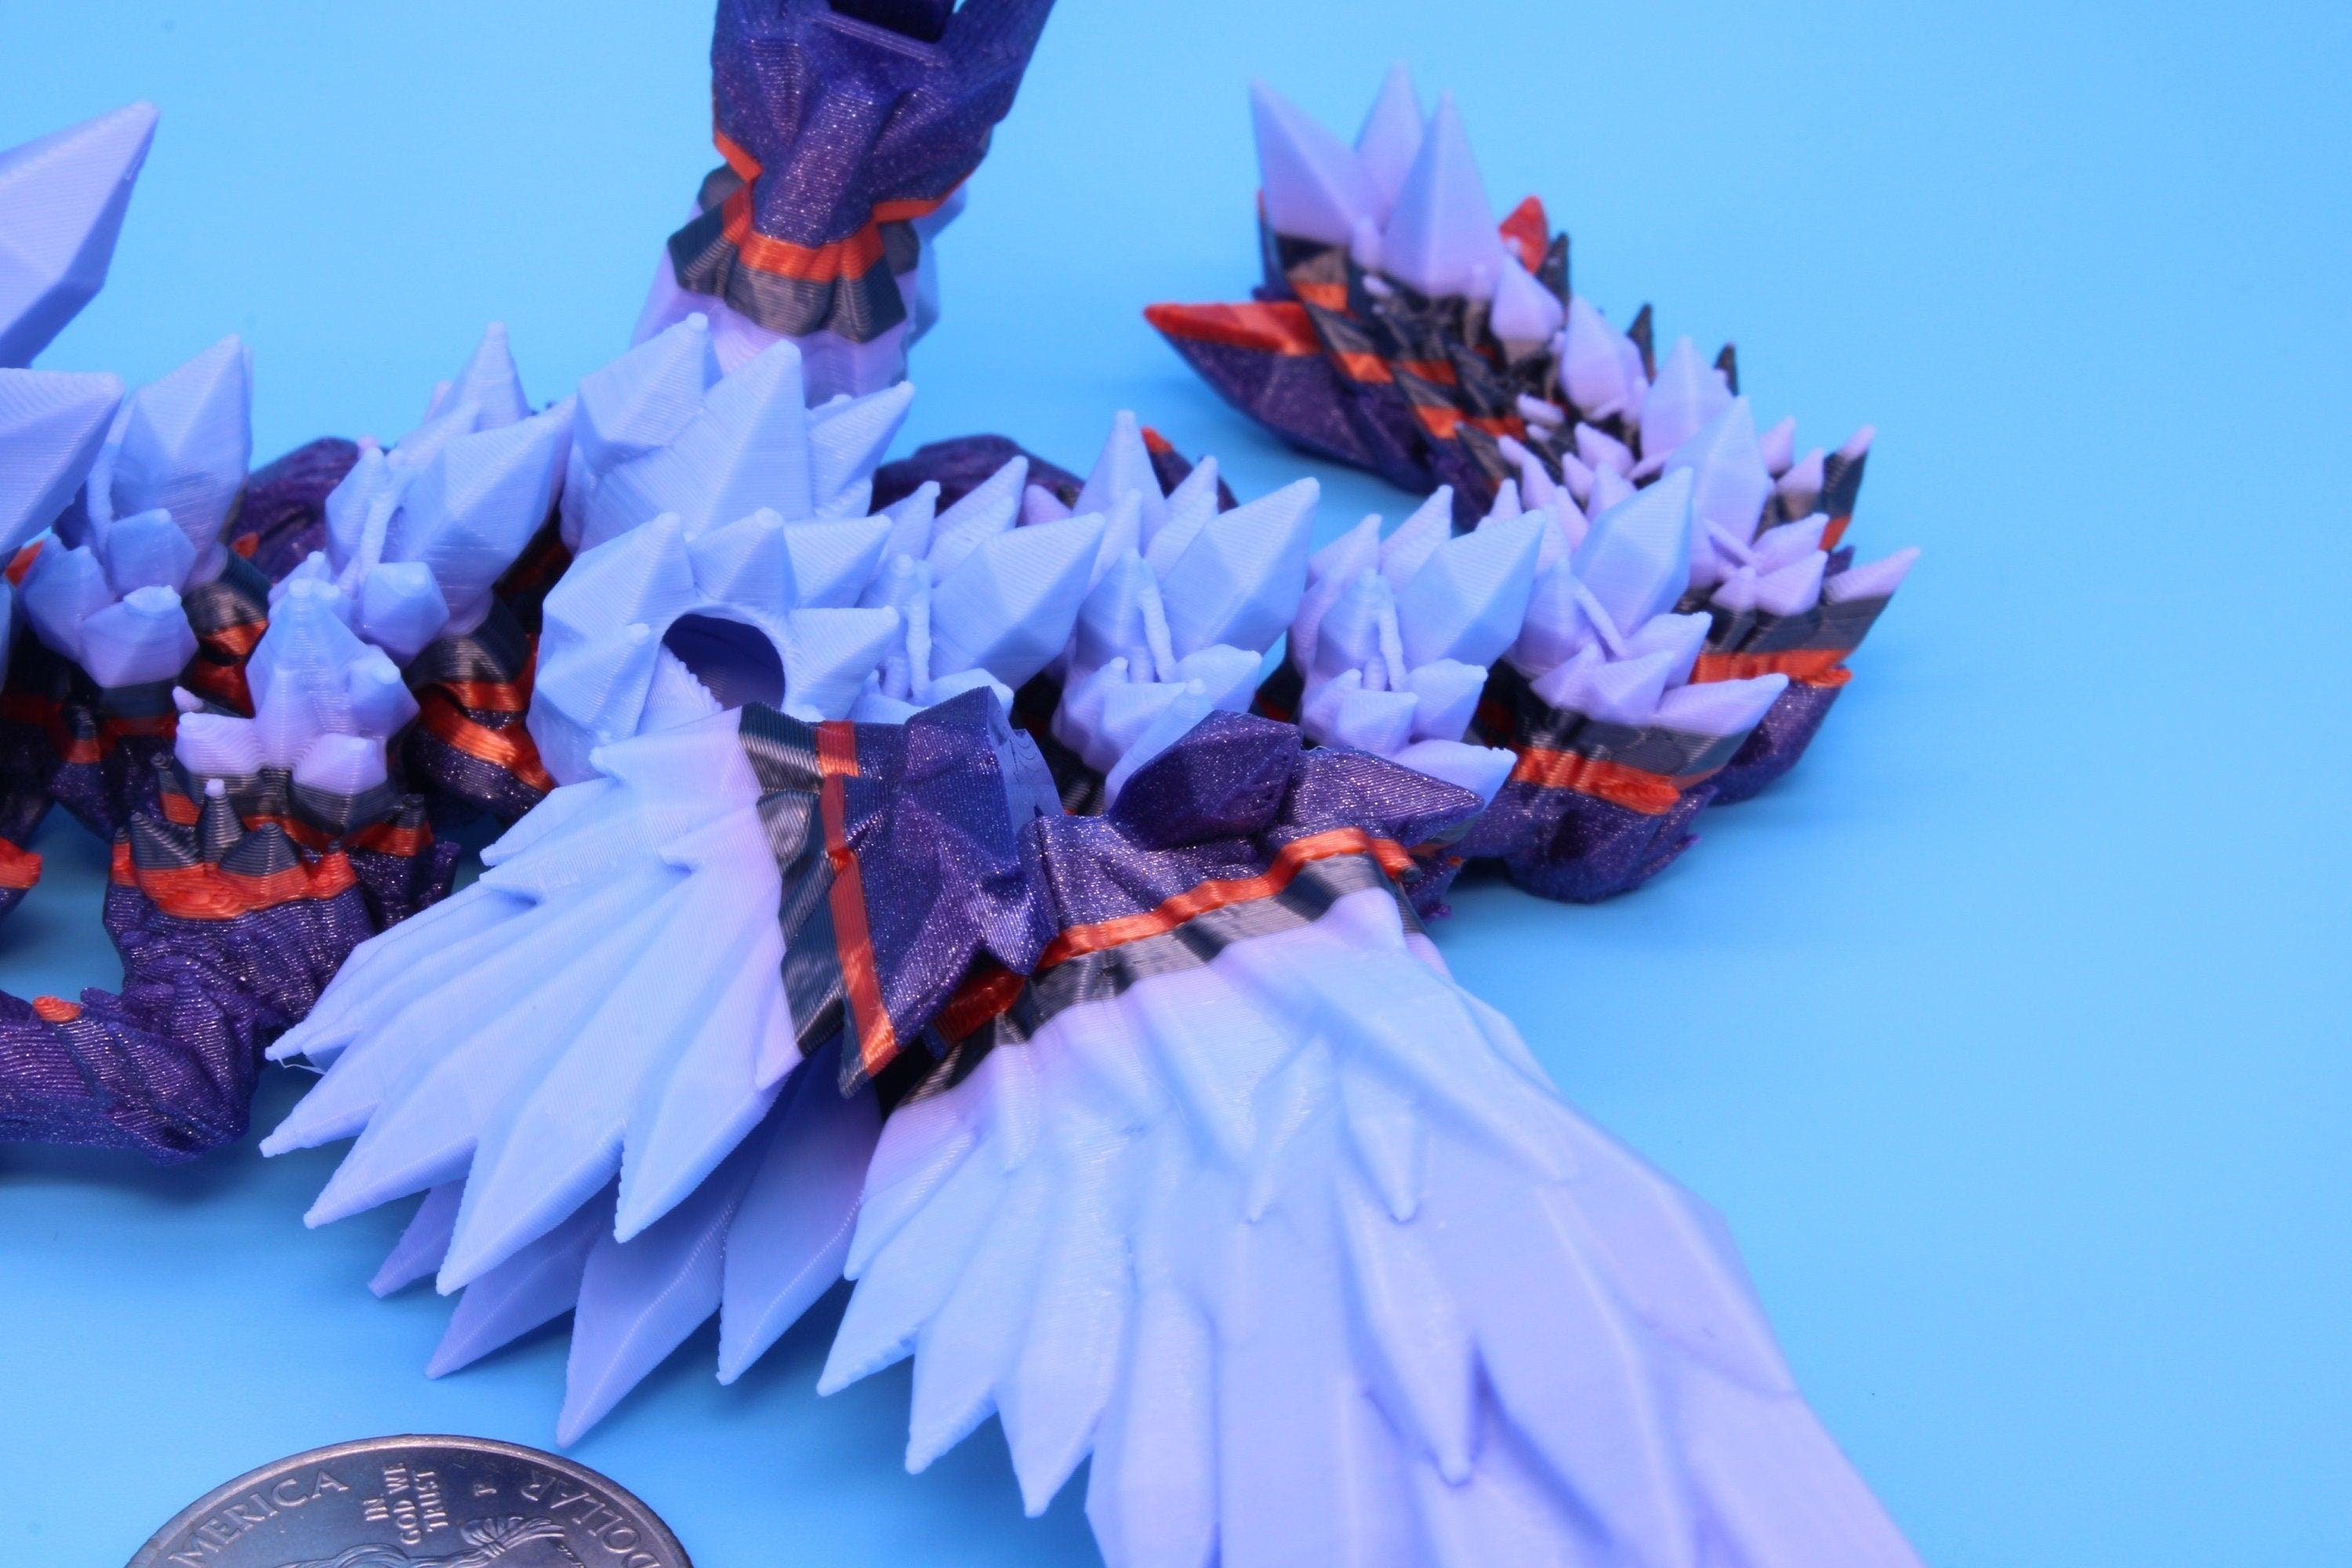 Miniature Baby Crystal Winged Dragon | Rainbow | 3D printed articulating Toy Fidget | Flexi Toy 7 in. head to tail | Stress Relief Gift